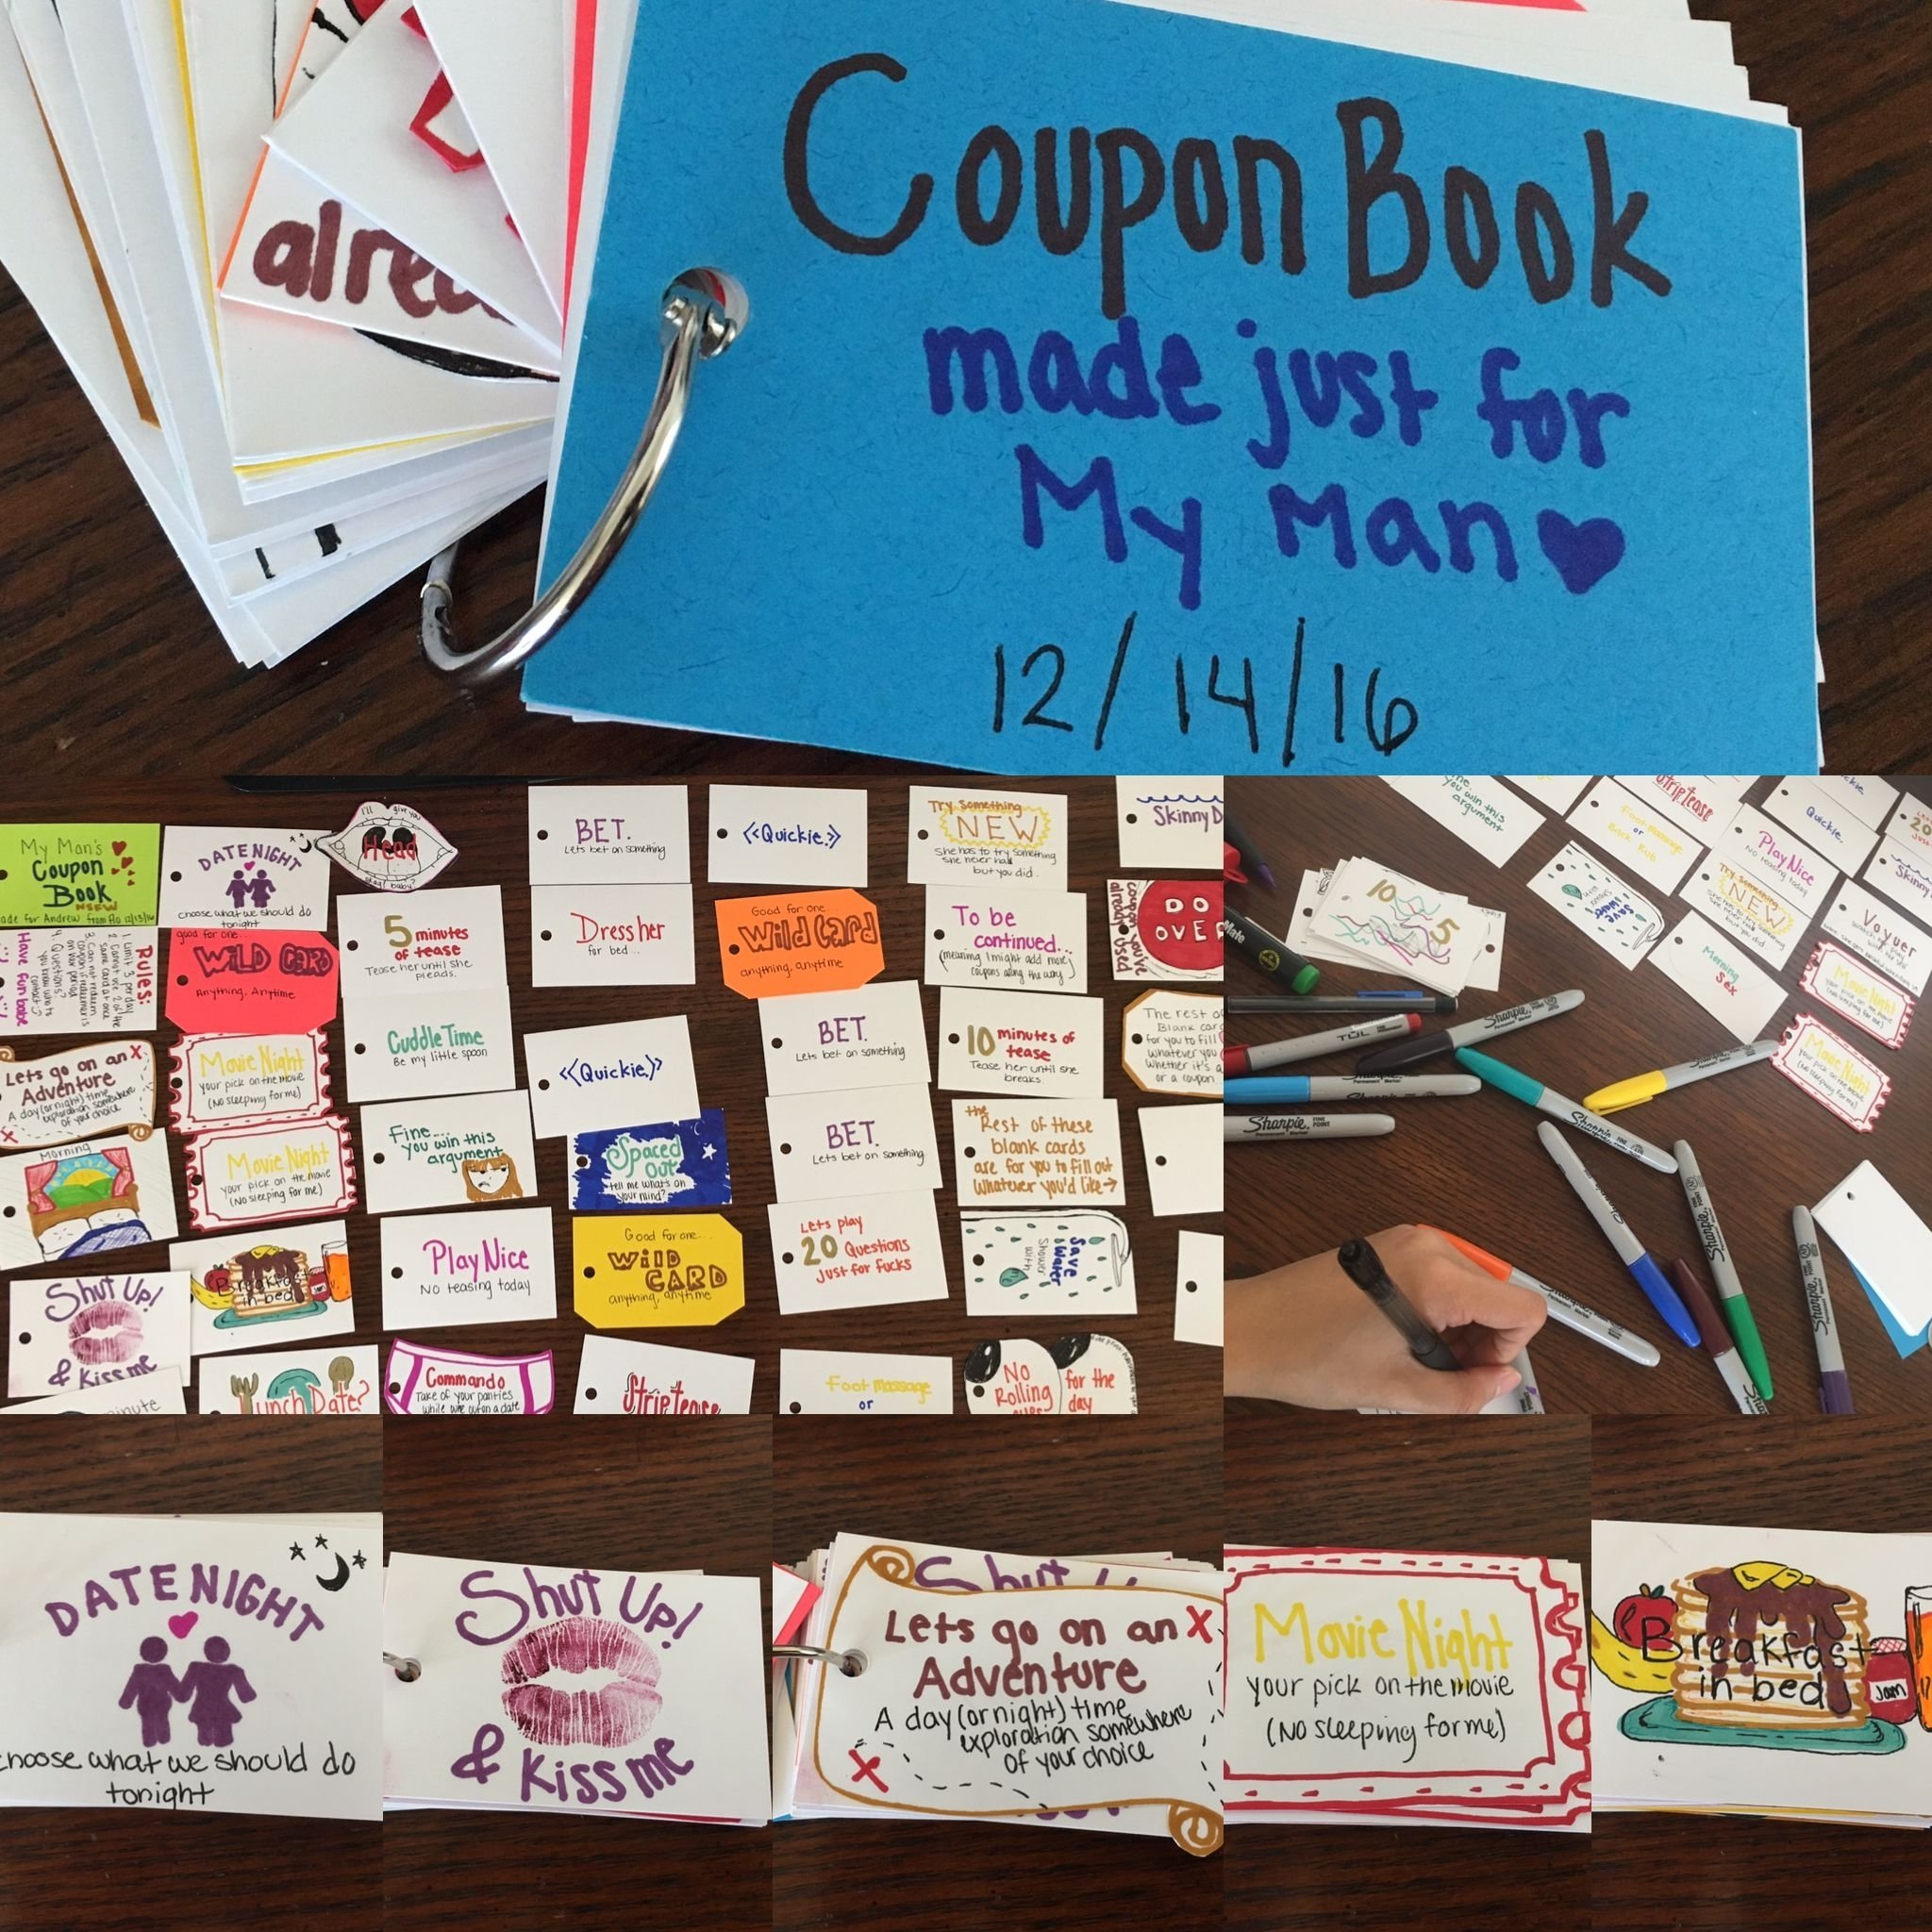 10 Great Coupon Book Ideas For Boyfriend a coupon book made for my boyfriend as a christmas gift booklet 2 2022